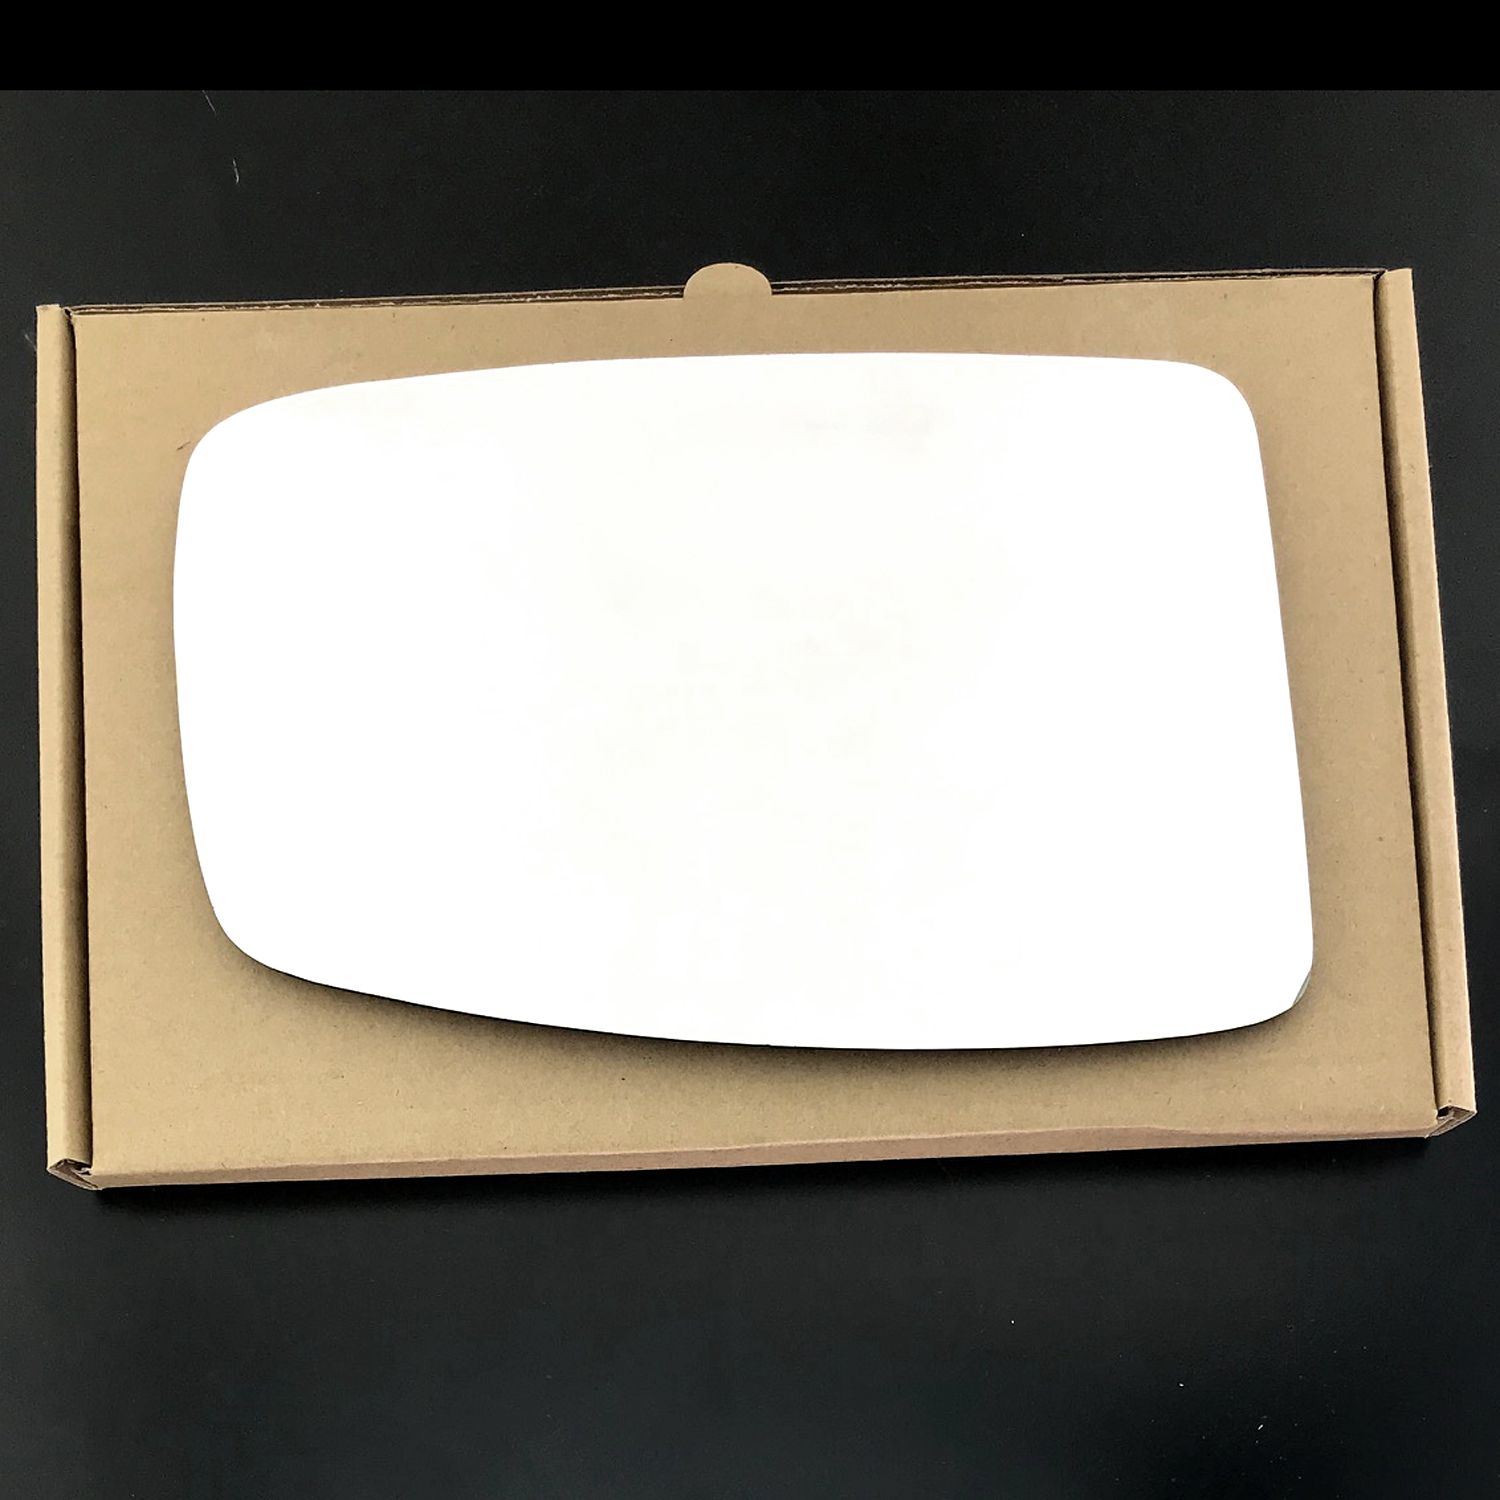 Vauxhall Movano Wing Mirror Glass LEFT HAND ( UK Passenger Side ) 1999 to 2010 – Convex Wing Mirror